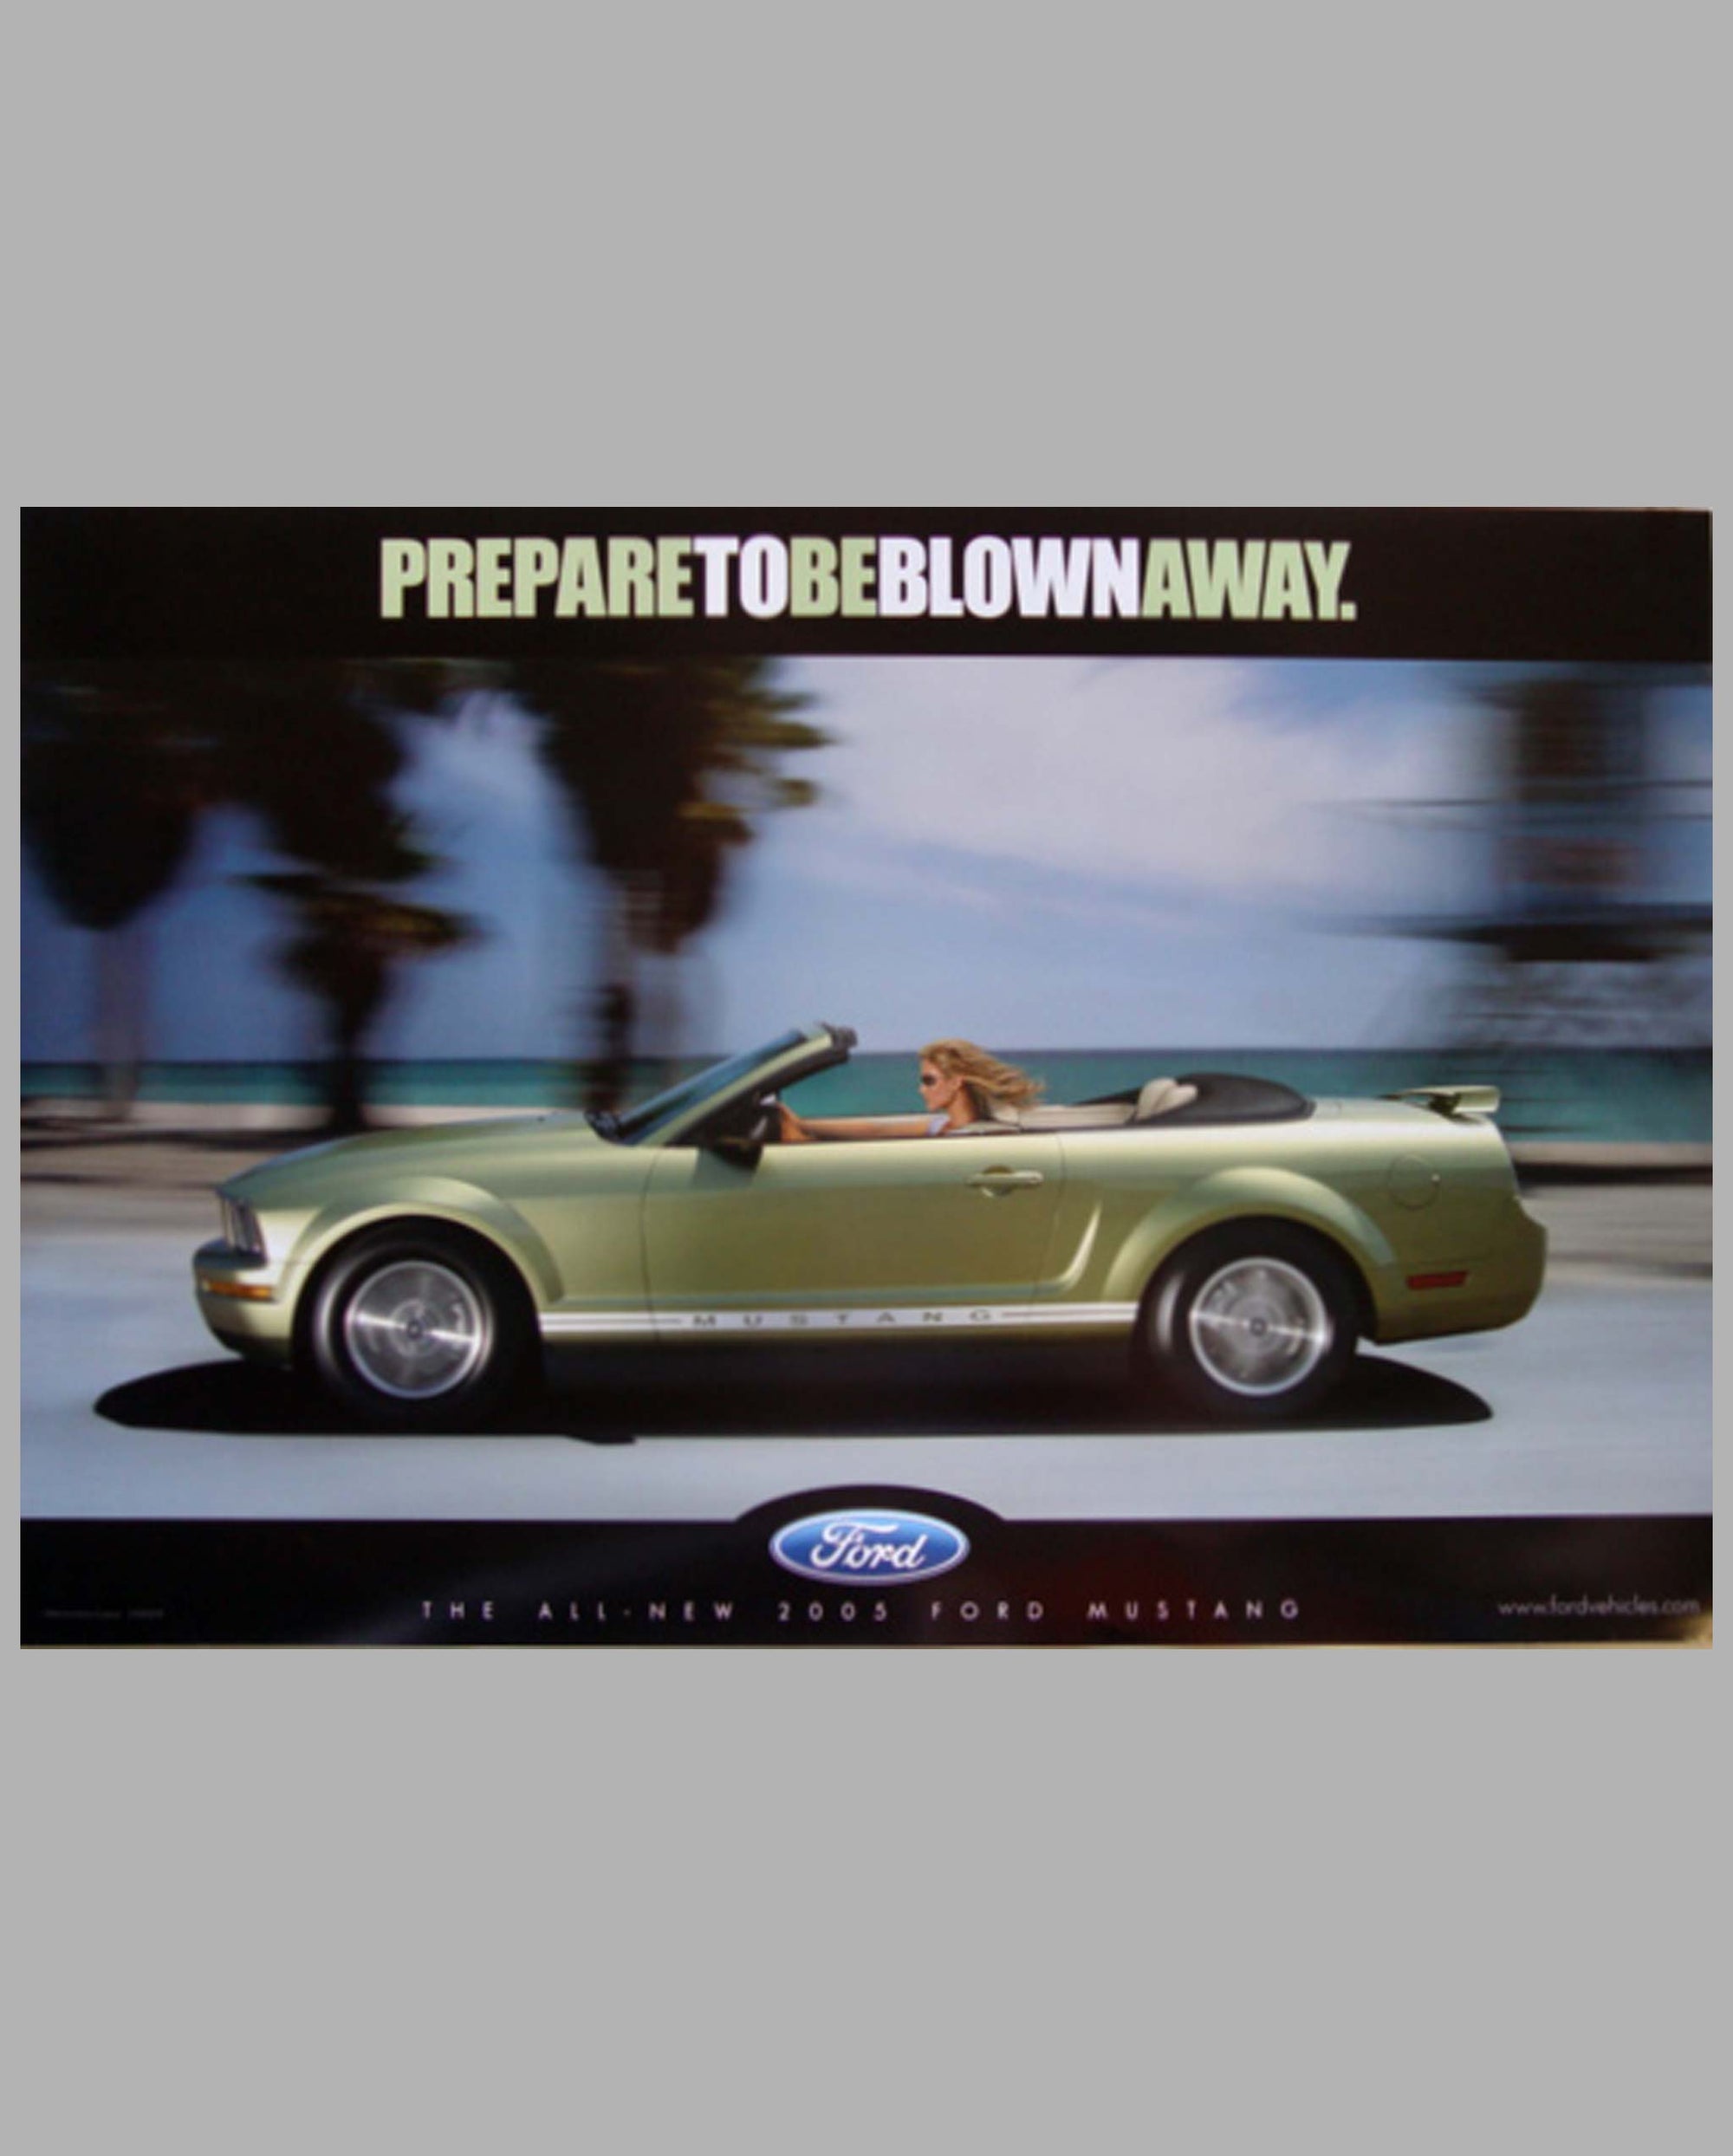 2005 Ford Mustang two-sided factory advertising poster front